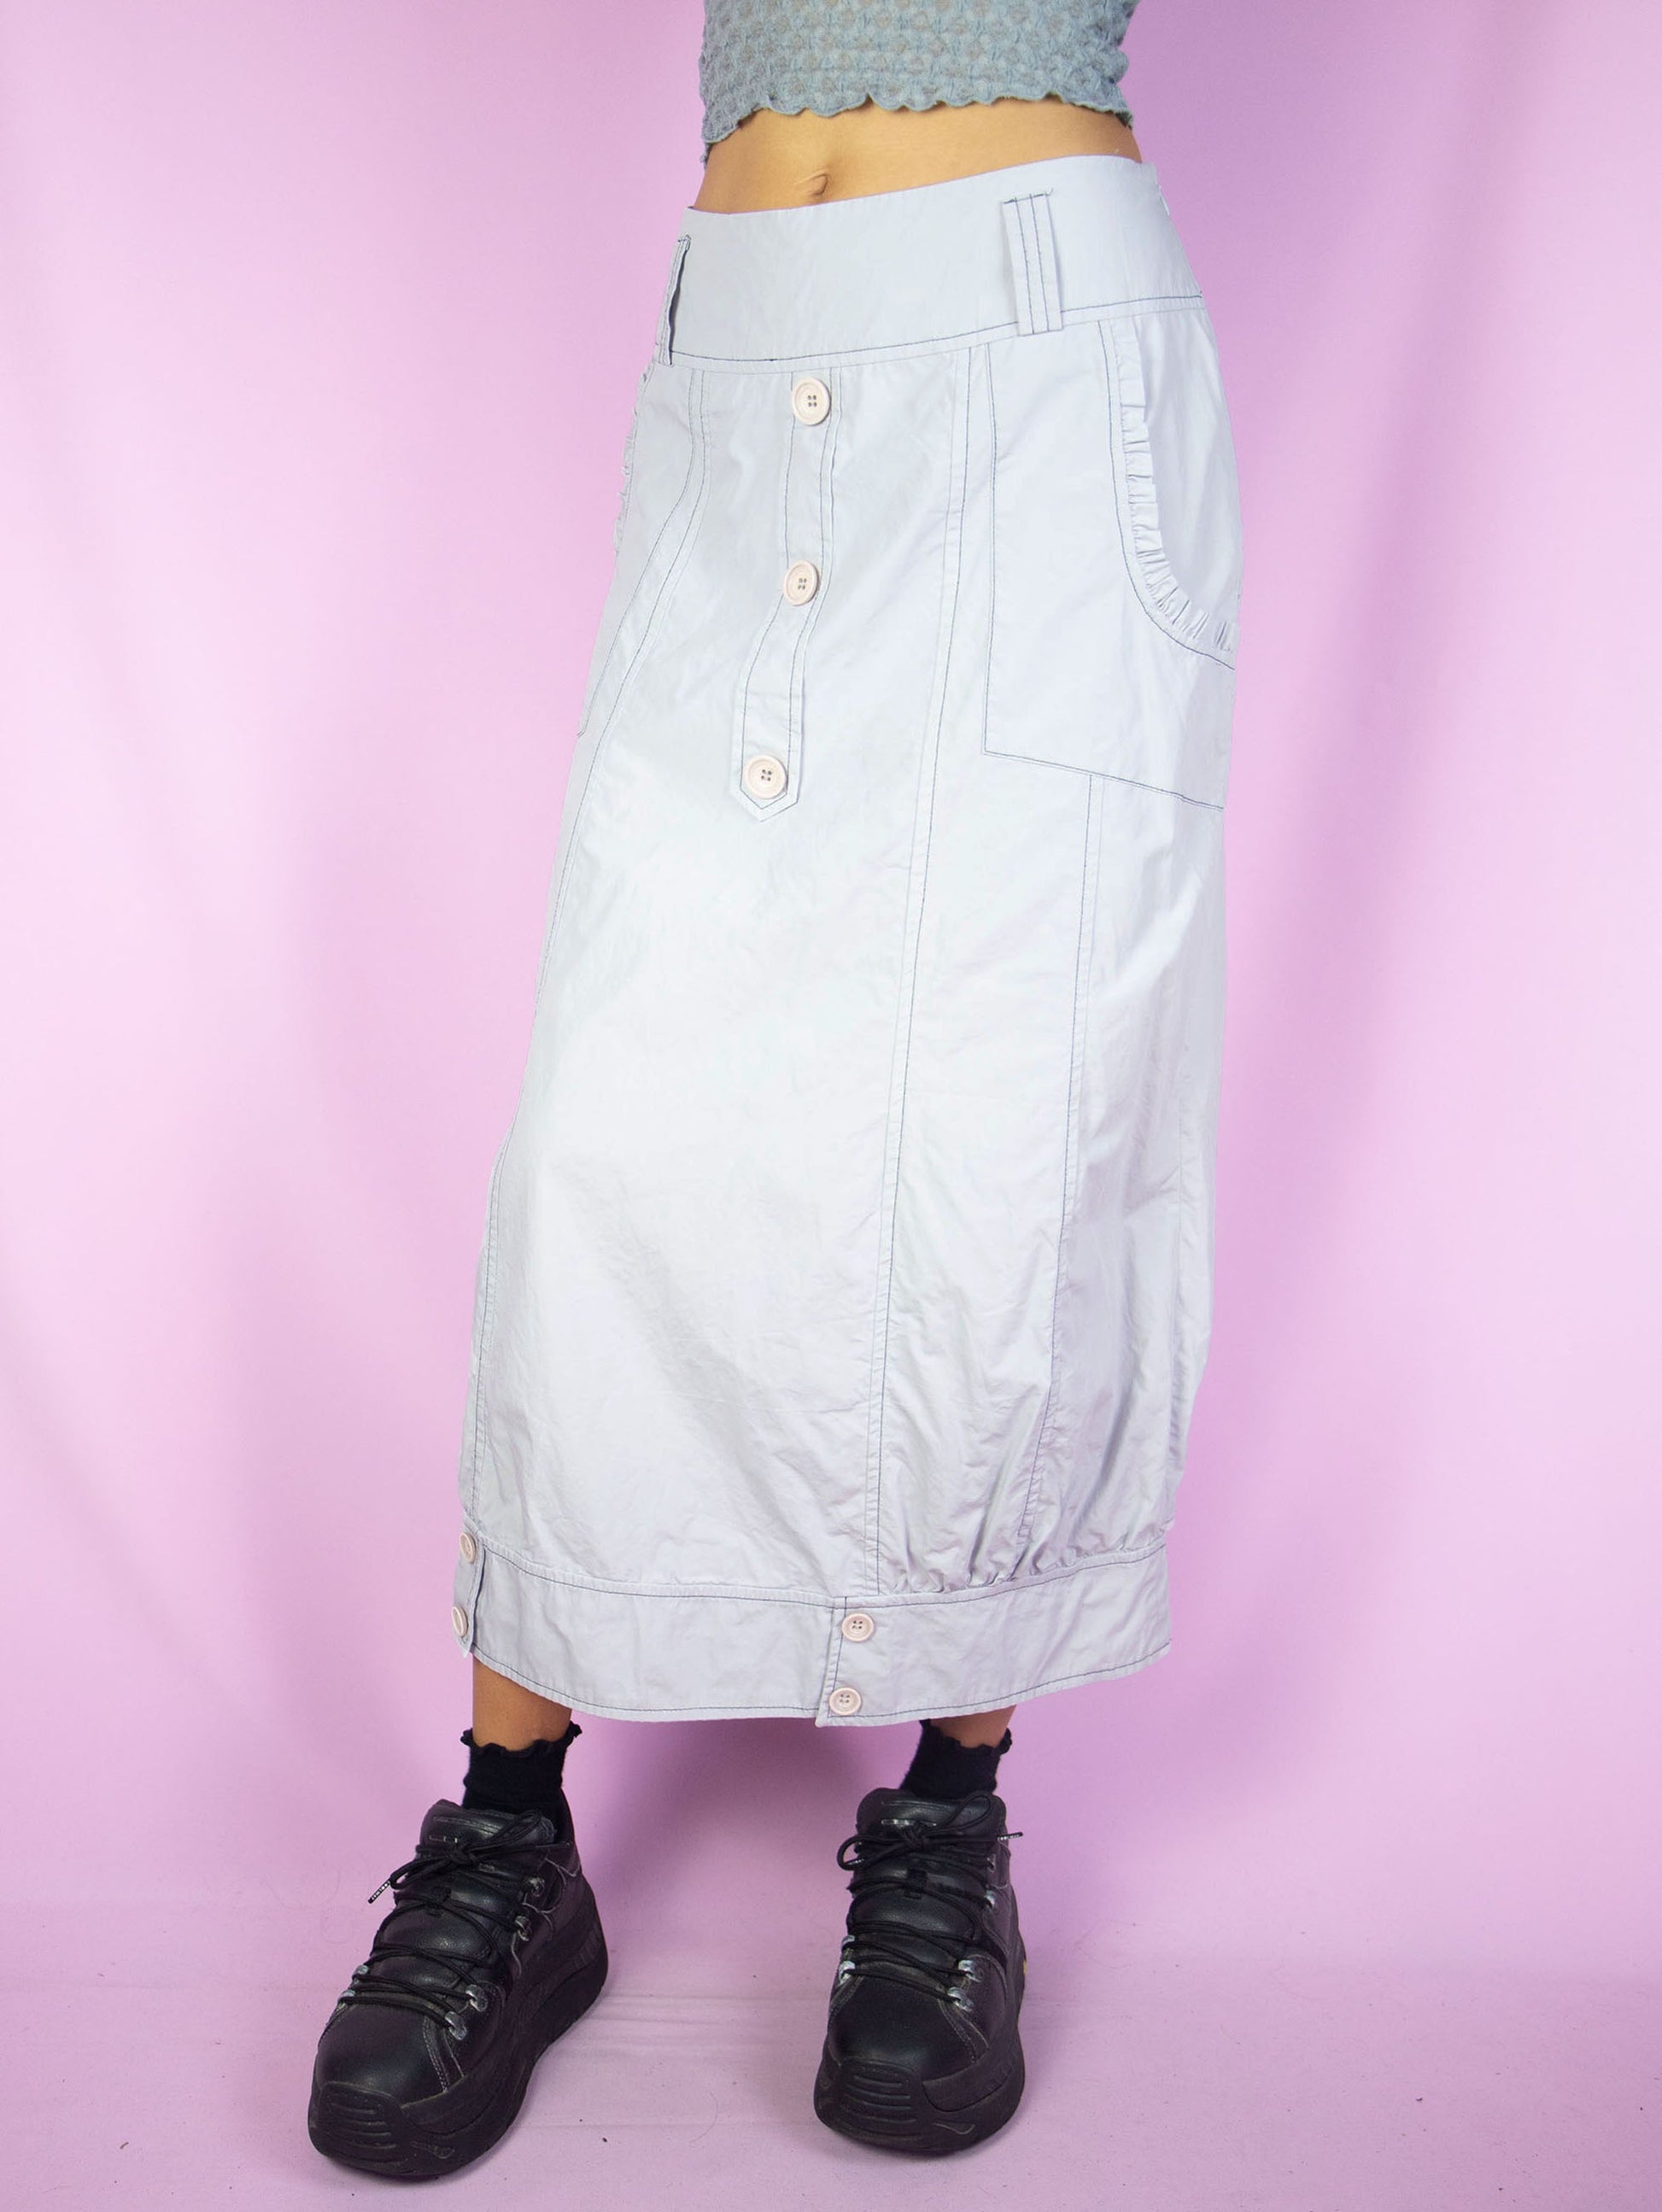 The Y2K Light Gray Midi Skirt is a vintage paneled light gray skirt with pockets and buttons and side zipper closure. Cyber goth gorpcore 2000s parachute cargo maxi skirt.